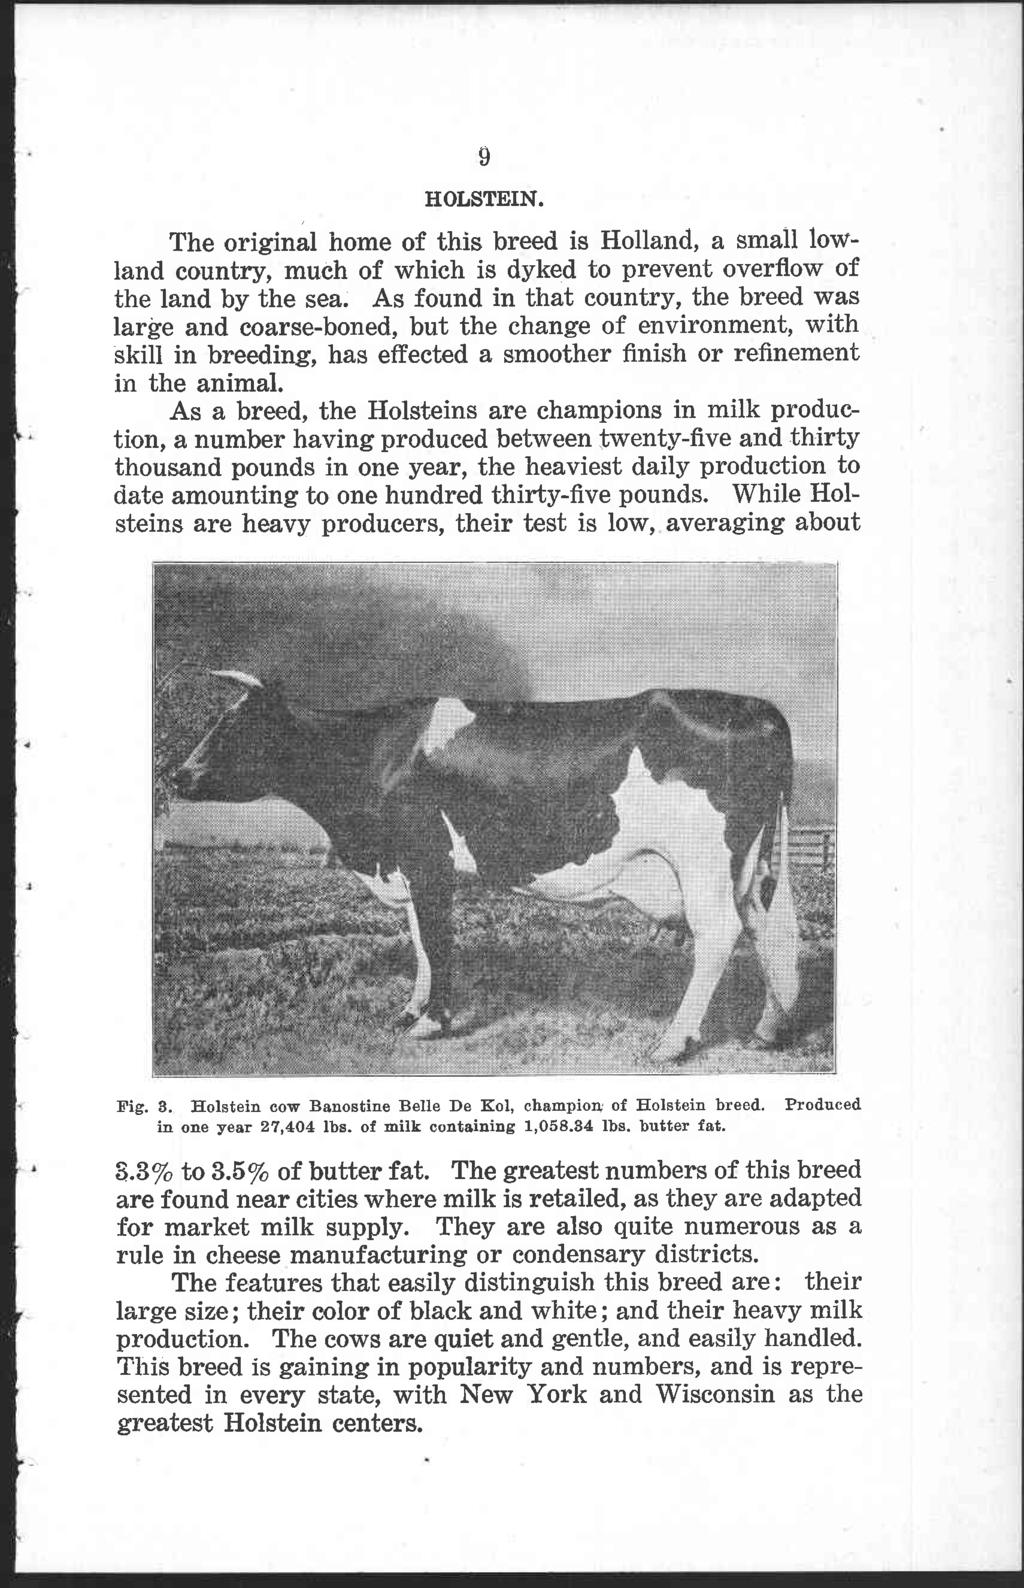 9 HOLSTEIN. The original home of this breed is Holland, a small lowland country, much of which is dyked to prevent overflow of the land by the sea.